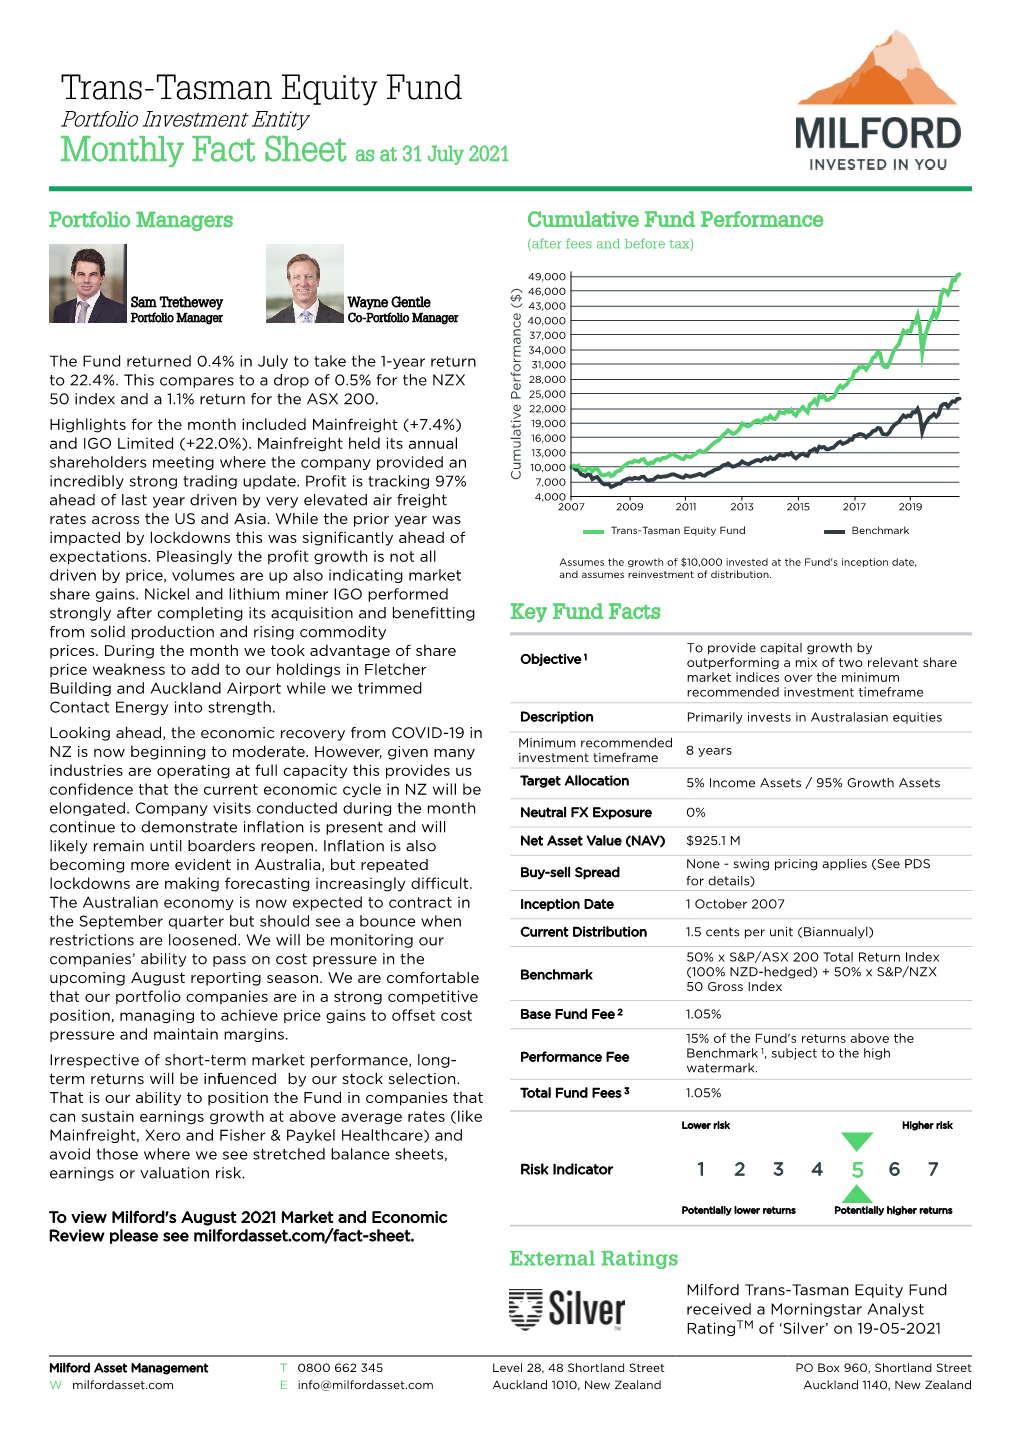 Trans-Tasman Equity Fund Monthly Fact Sheet As at 31 July 2021